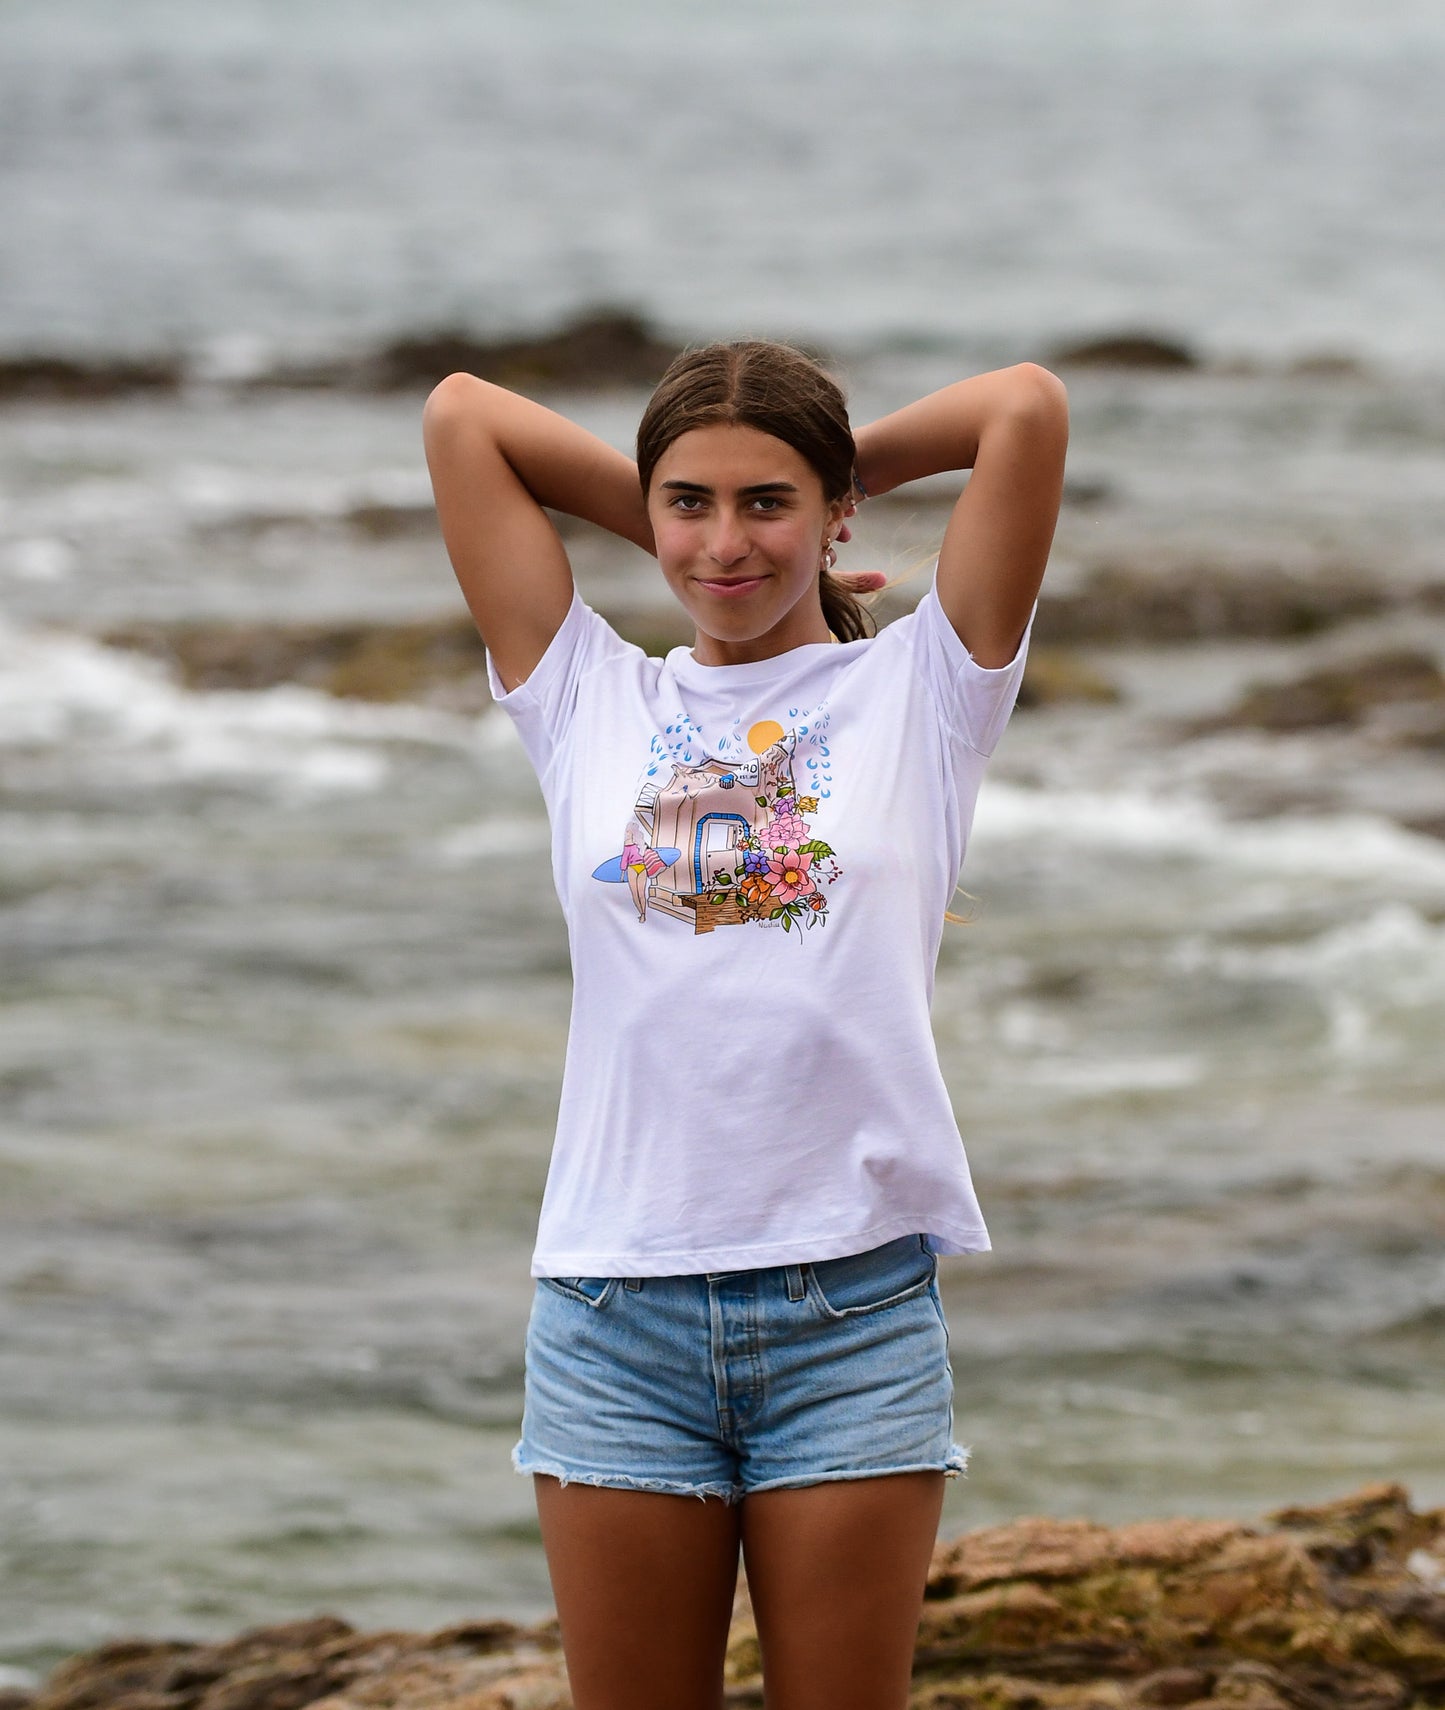 North Shore Girl floral surfer girl graphic tee. Laguna Beach lifeguard tower hand illustrated by artist. Handmade clothing 